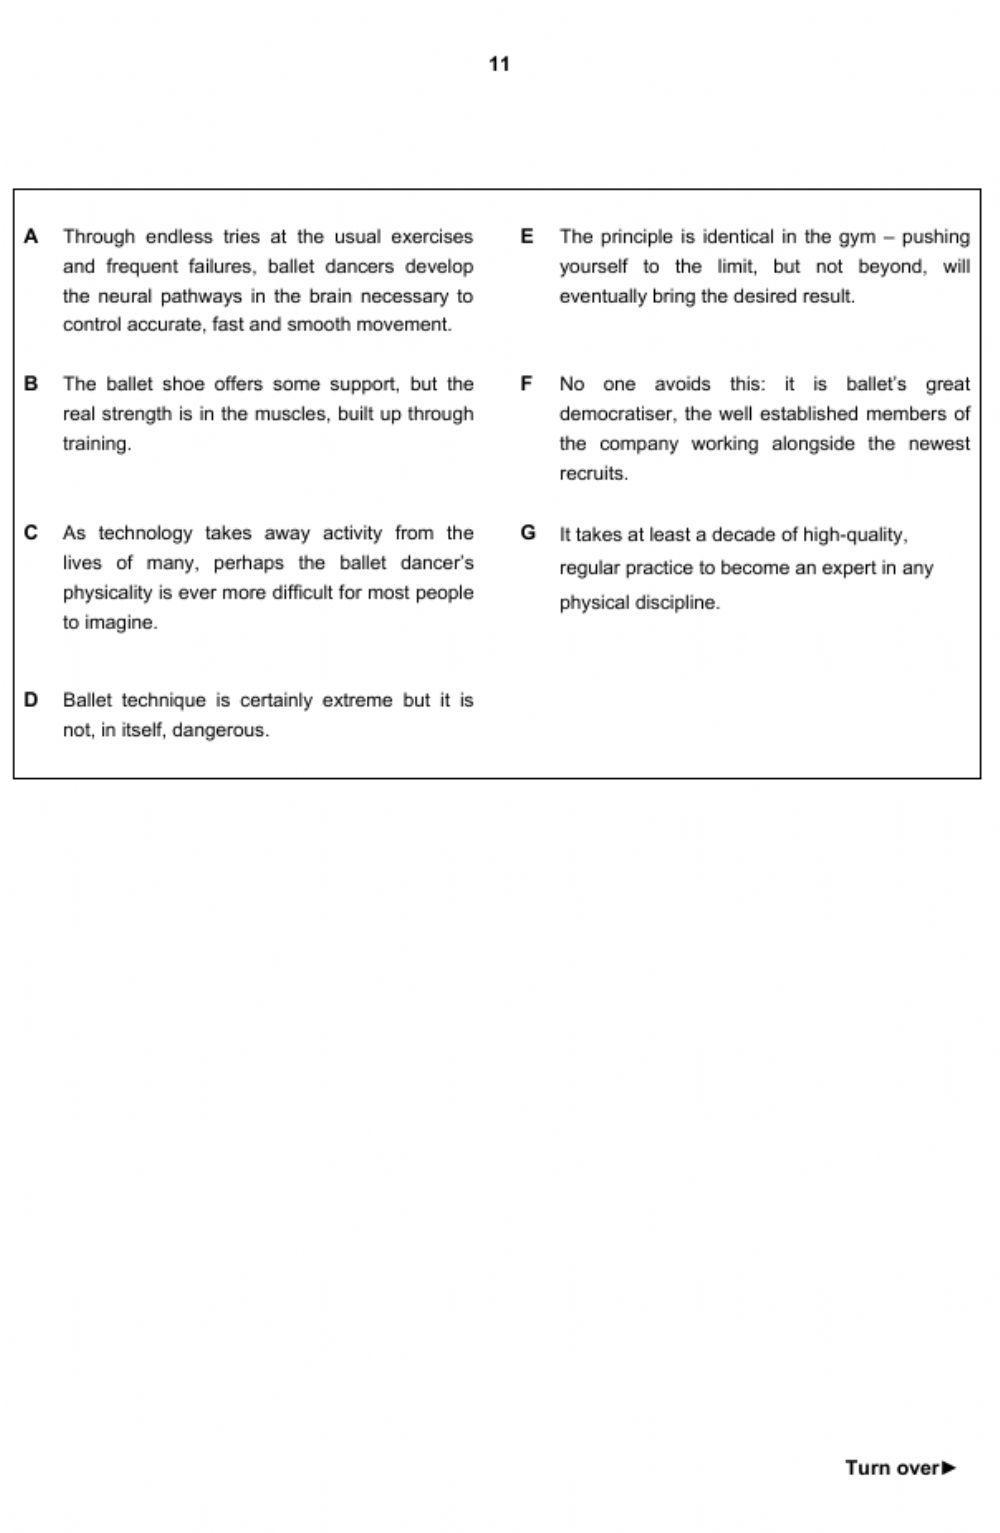 Reading and Use of English Sample Test 1 P2